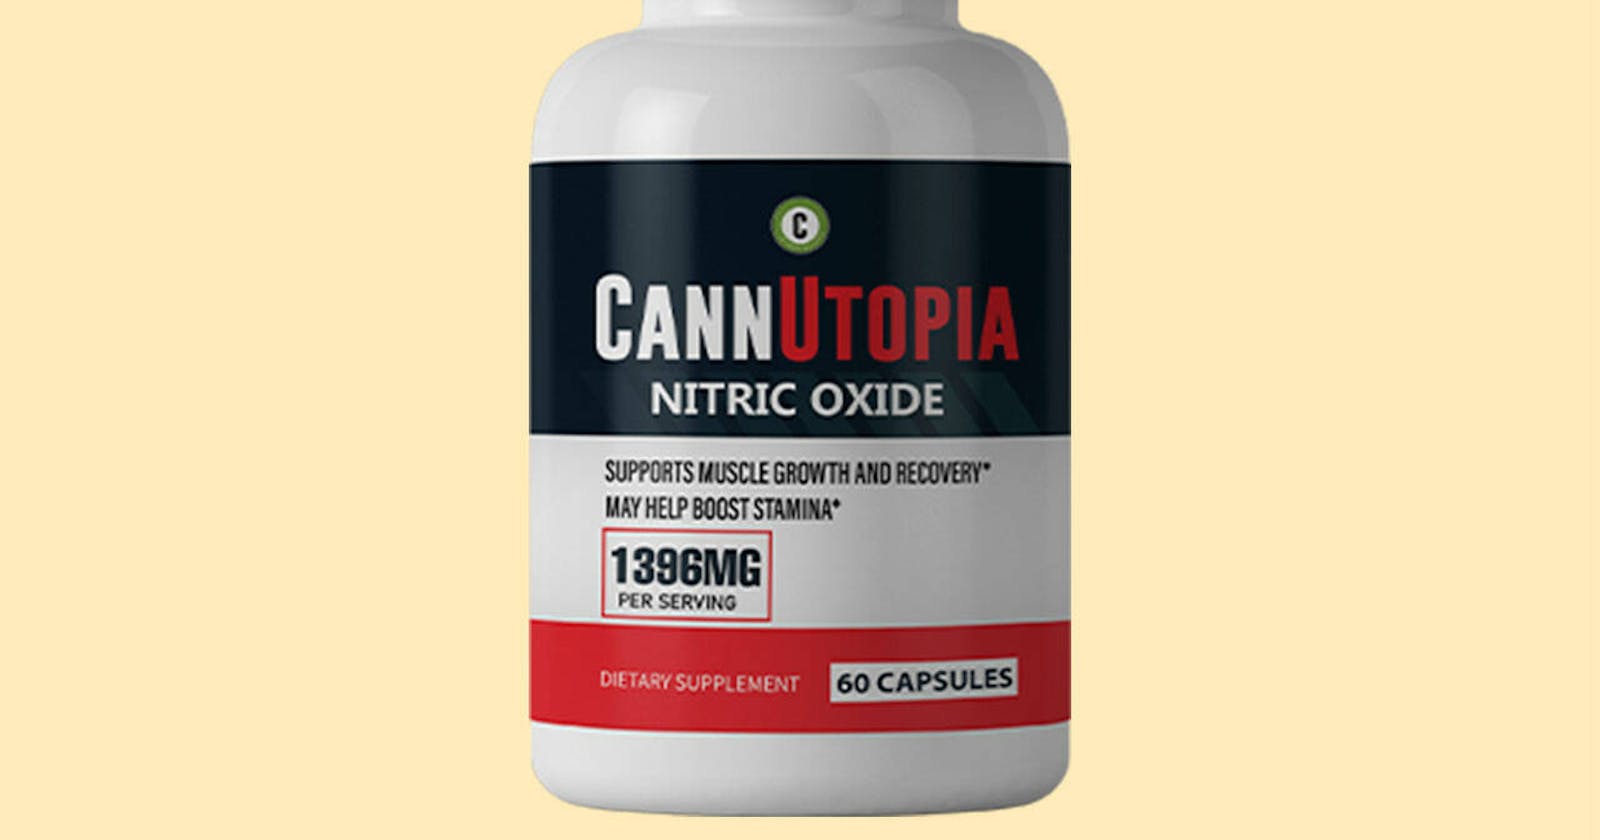 CannUtopia Nitric Oxide Reviews {Shocking Results} Exposed Ingredients & Cons, Side Effects!